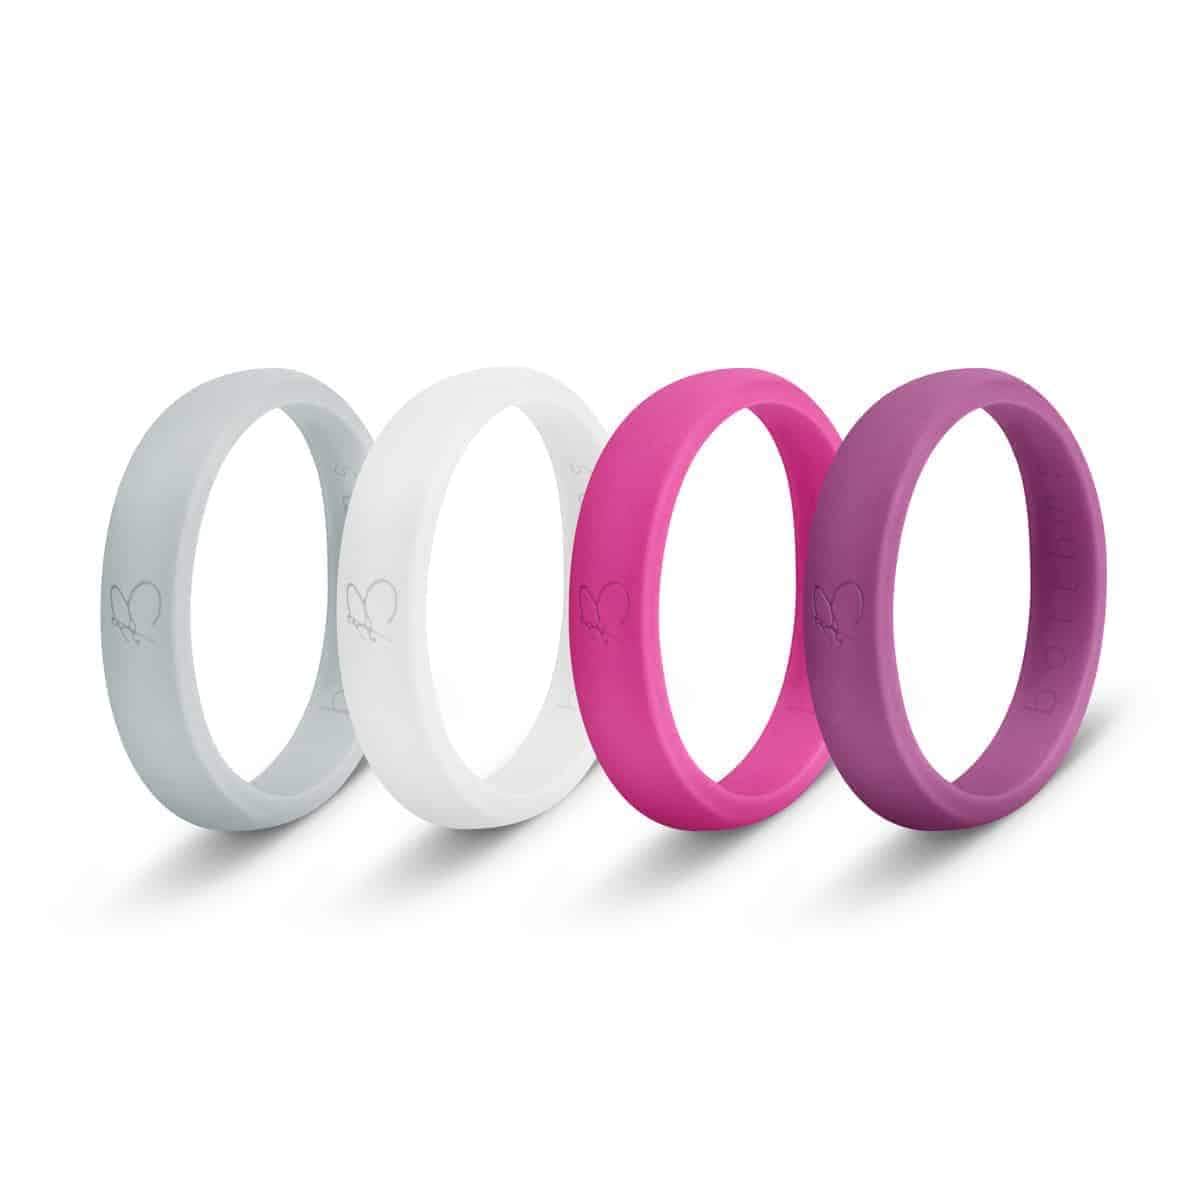 botthms botthms Ladies Silicone Rings Combo Pack - 4 Silicone Rings